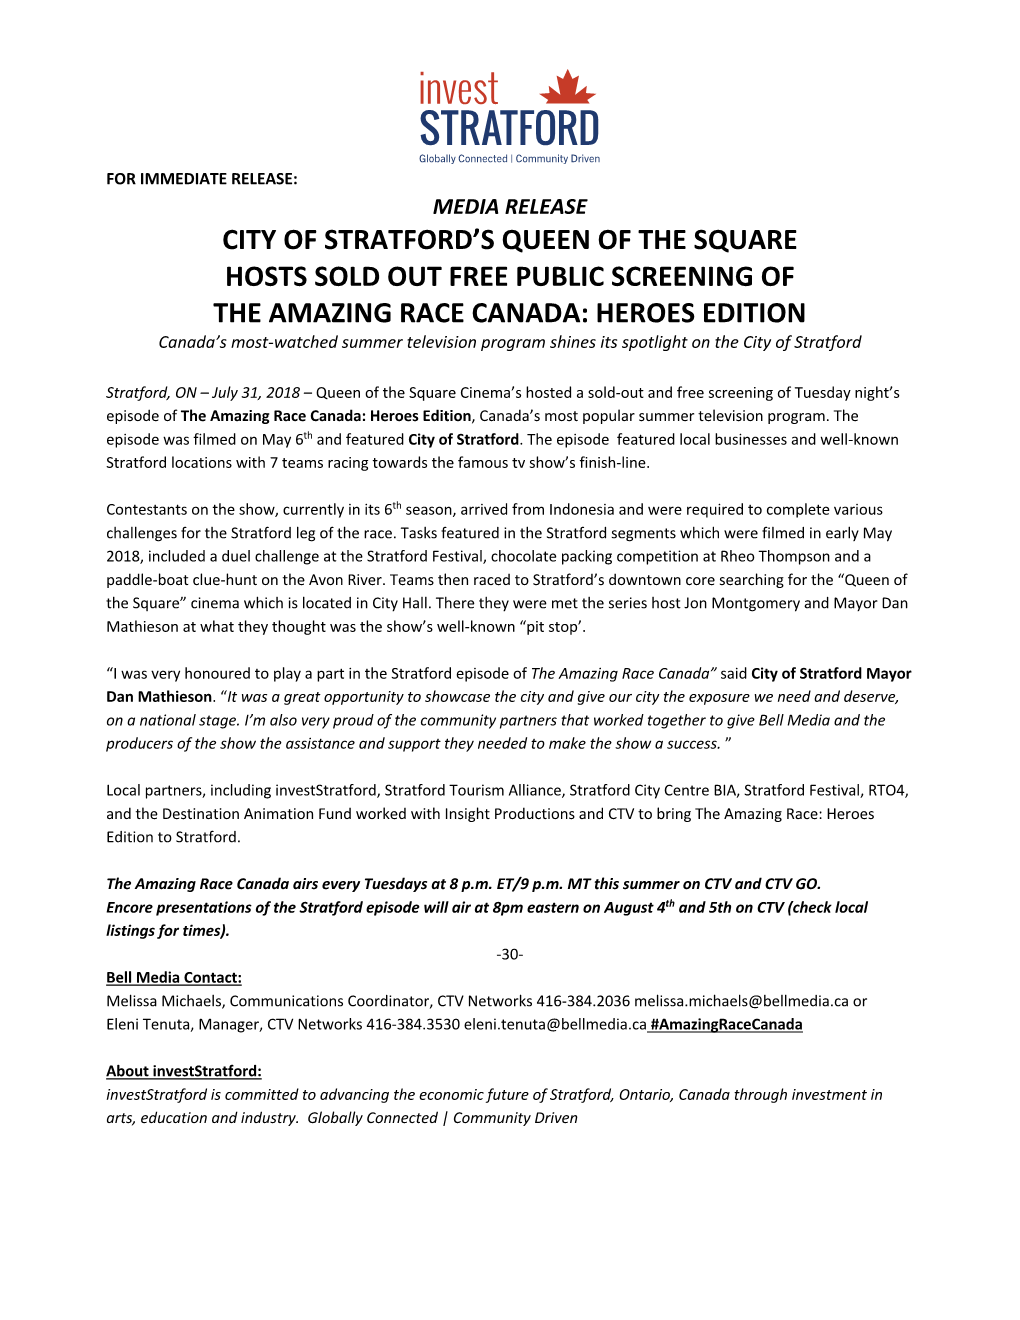 City of Stratford's Queen of the Square Hosts Sold Out